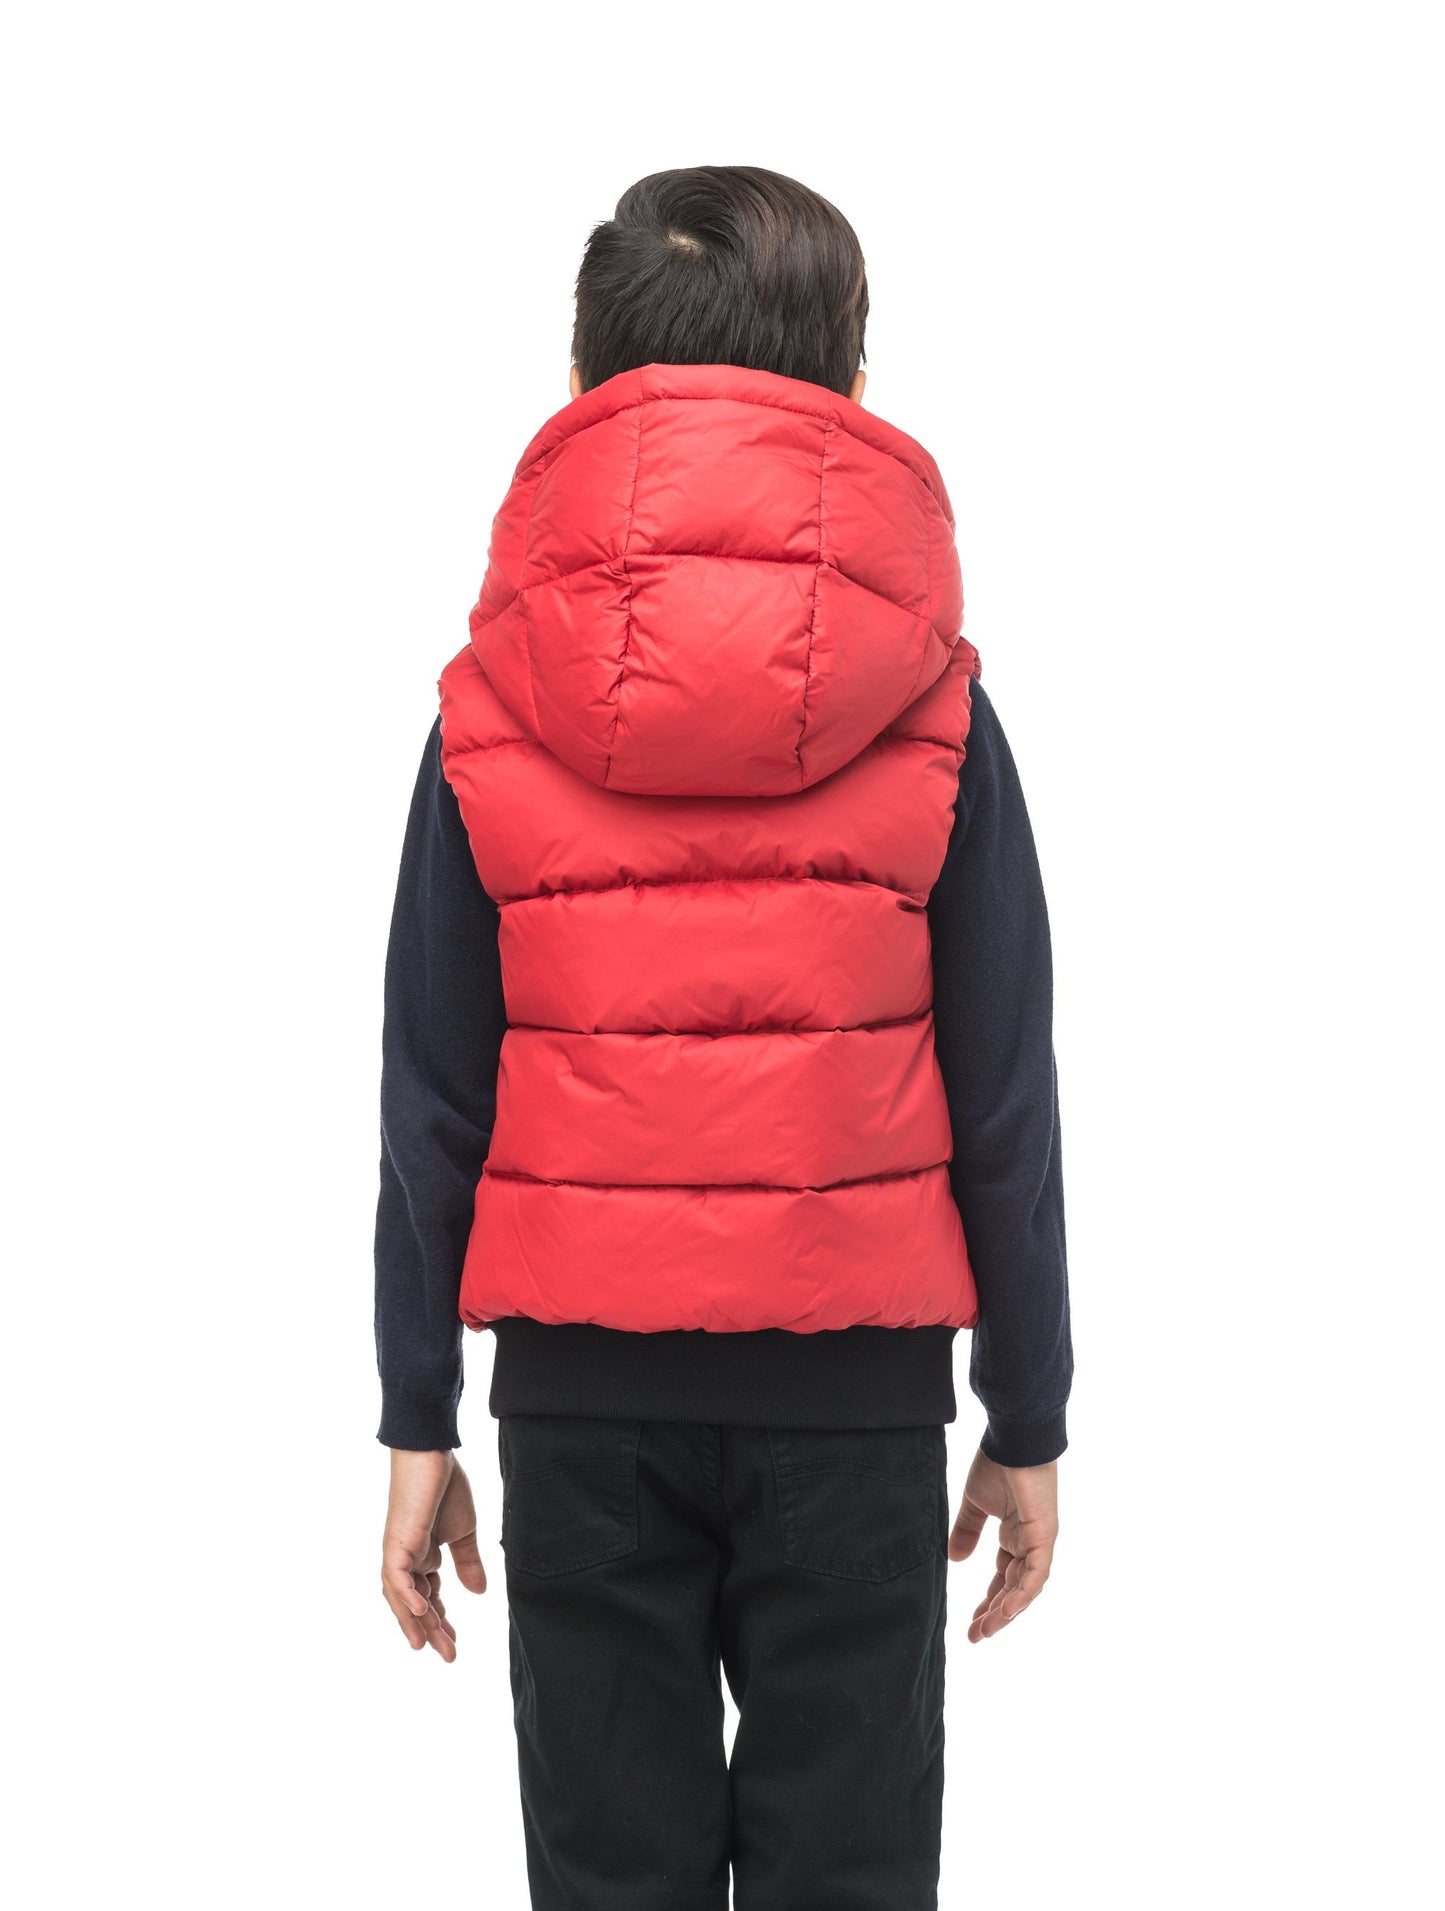 Sleeveless down filled kids vest with a hood and contrast zipper details in Vermillion